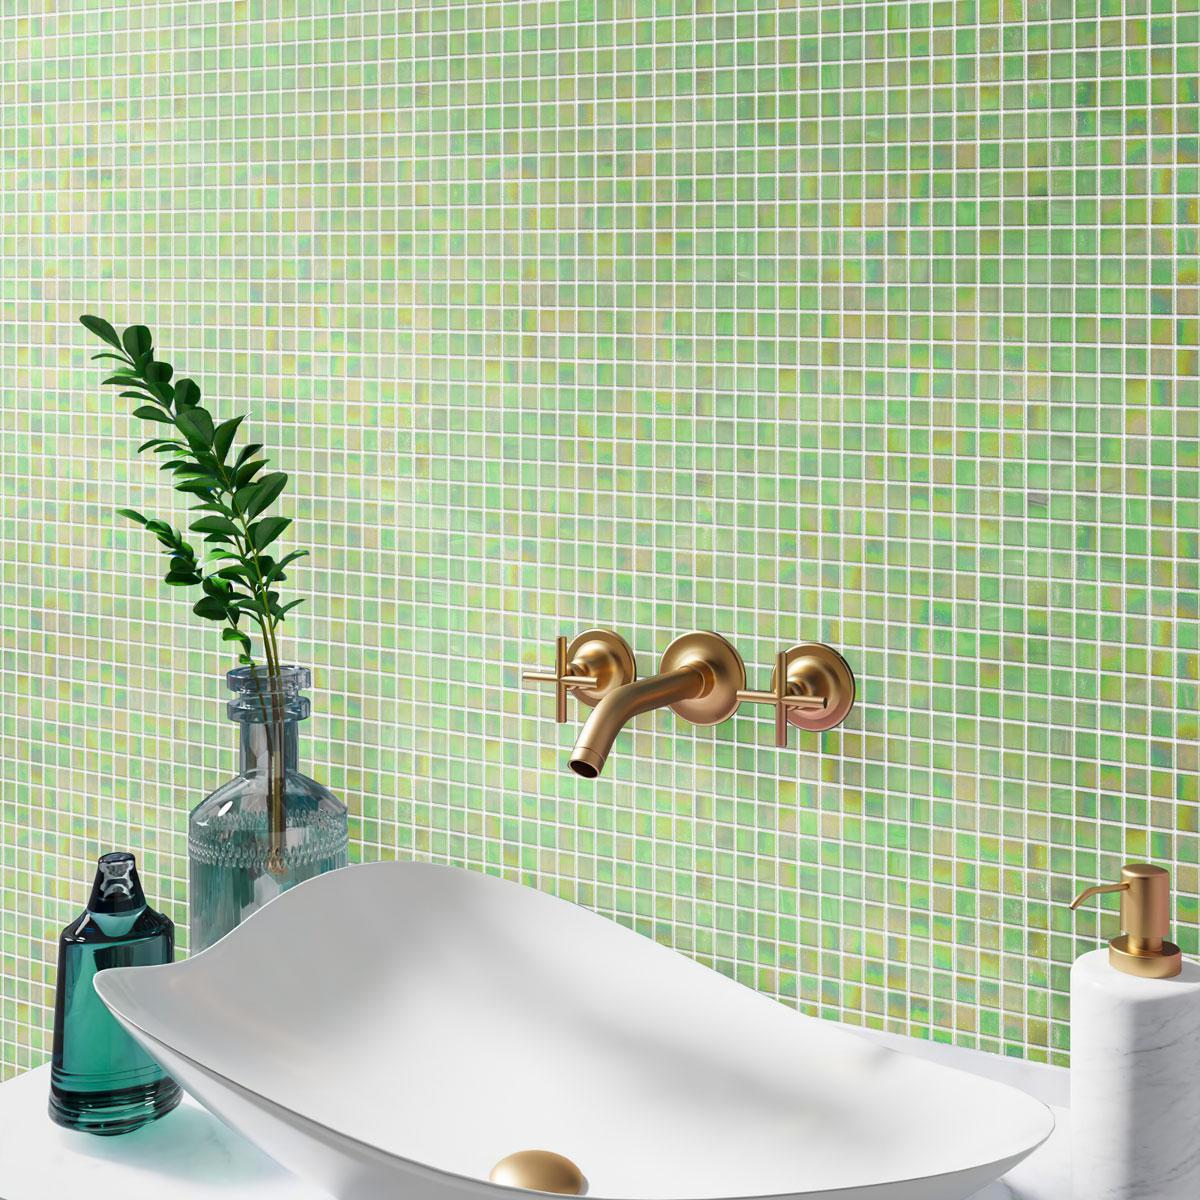 Pearly Pastel Green Squares Glass Pool Tile  Bathroom - fresh, vibrant, and inviting